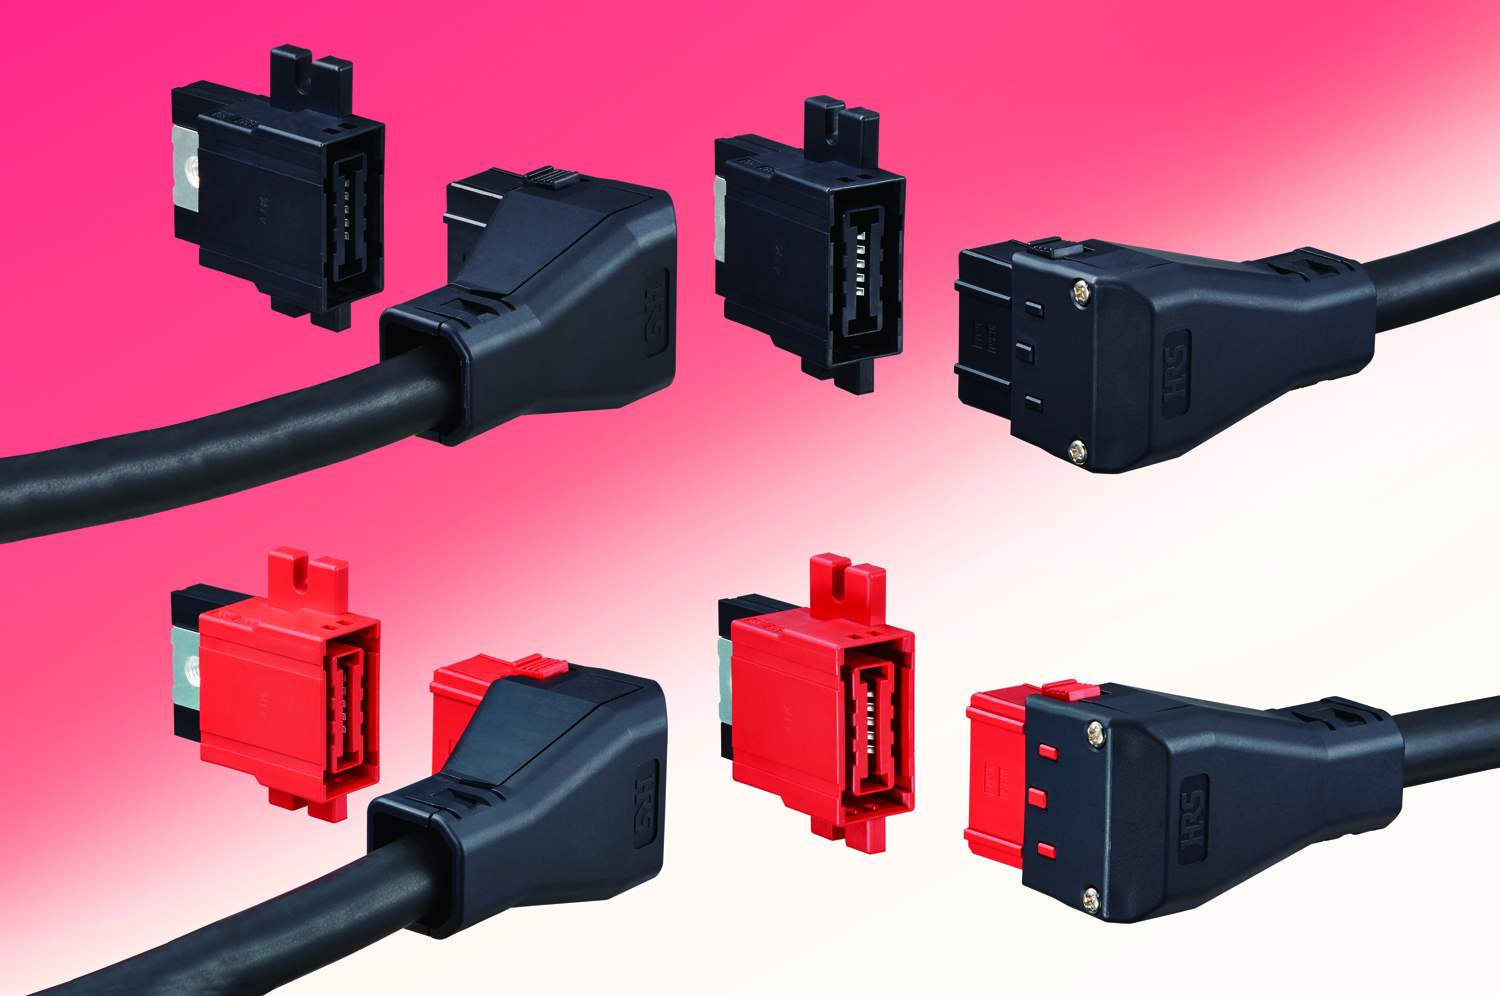 Hirose releases a high current, single circuit storage battery connector